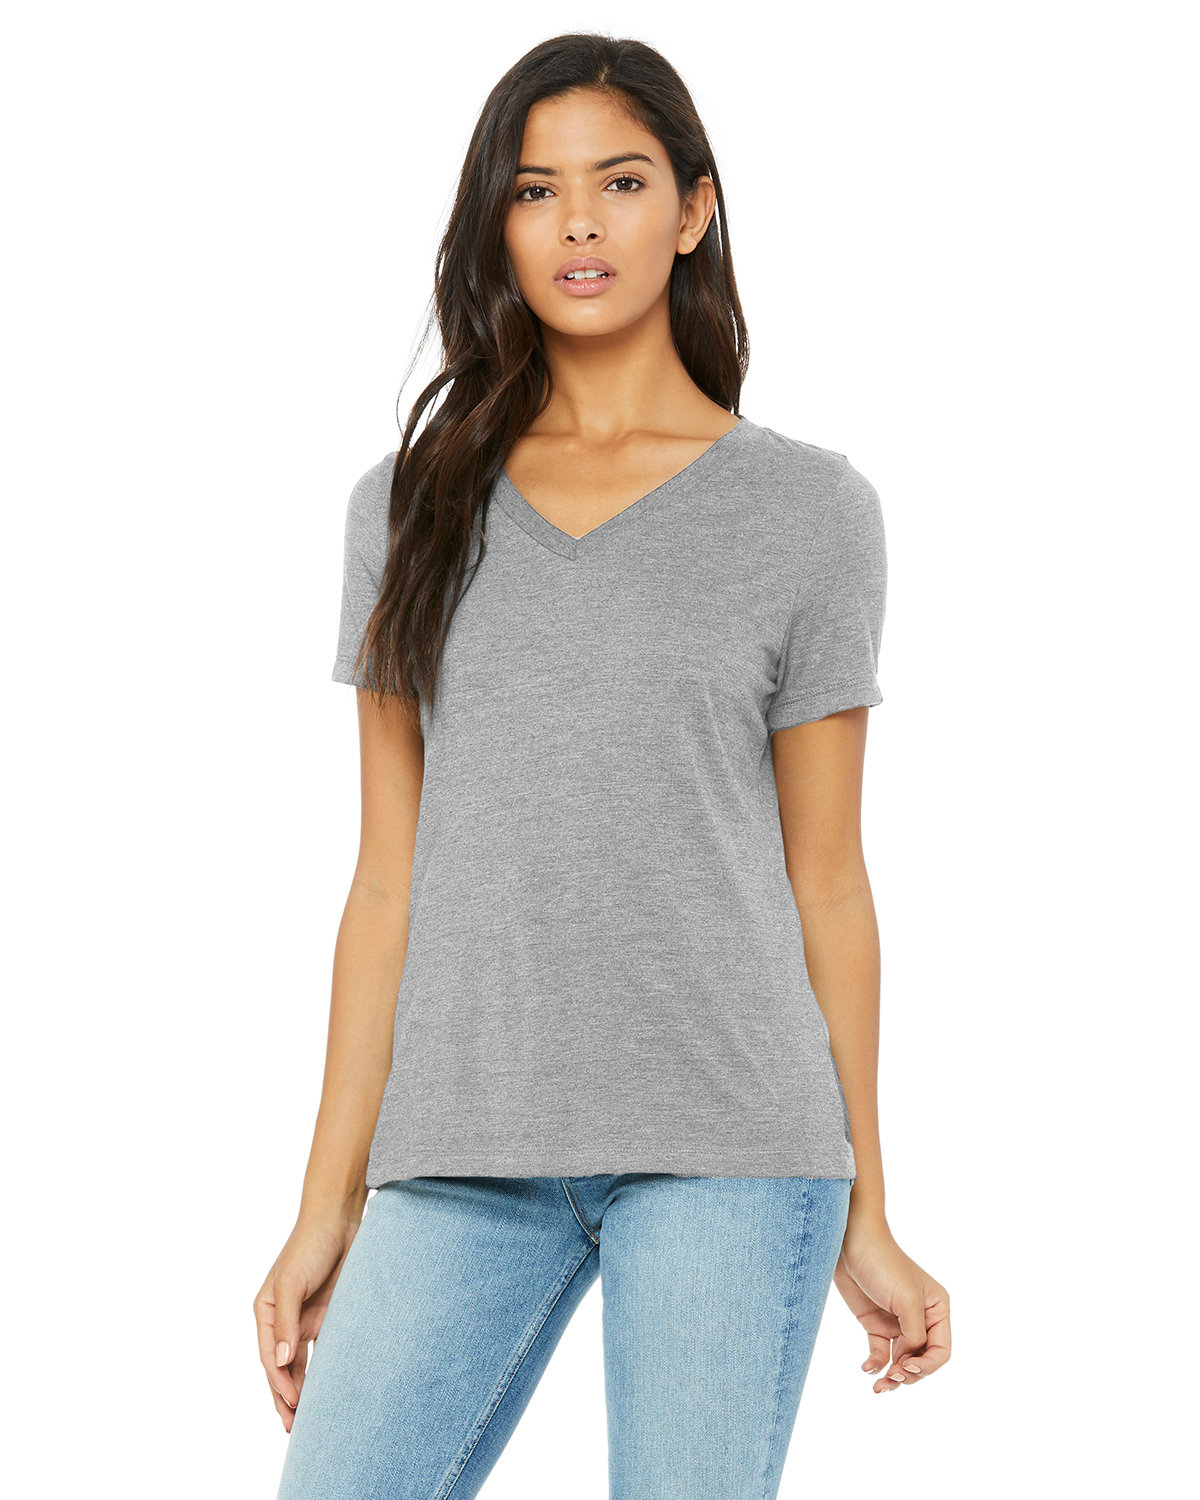 Bella + Canvas Ladies' Relaxed Jersey Short-Sleeve V-Neck T-Shirt